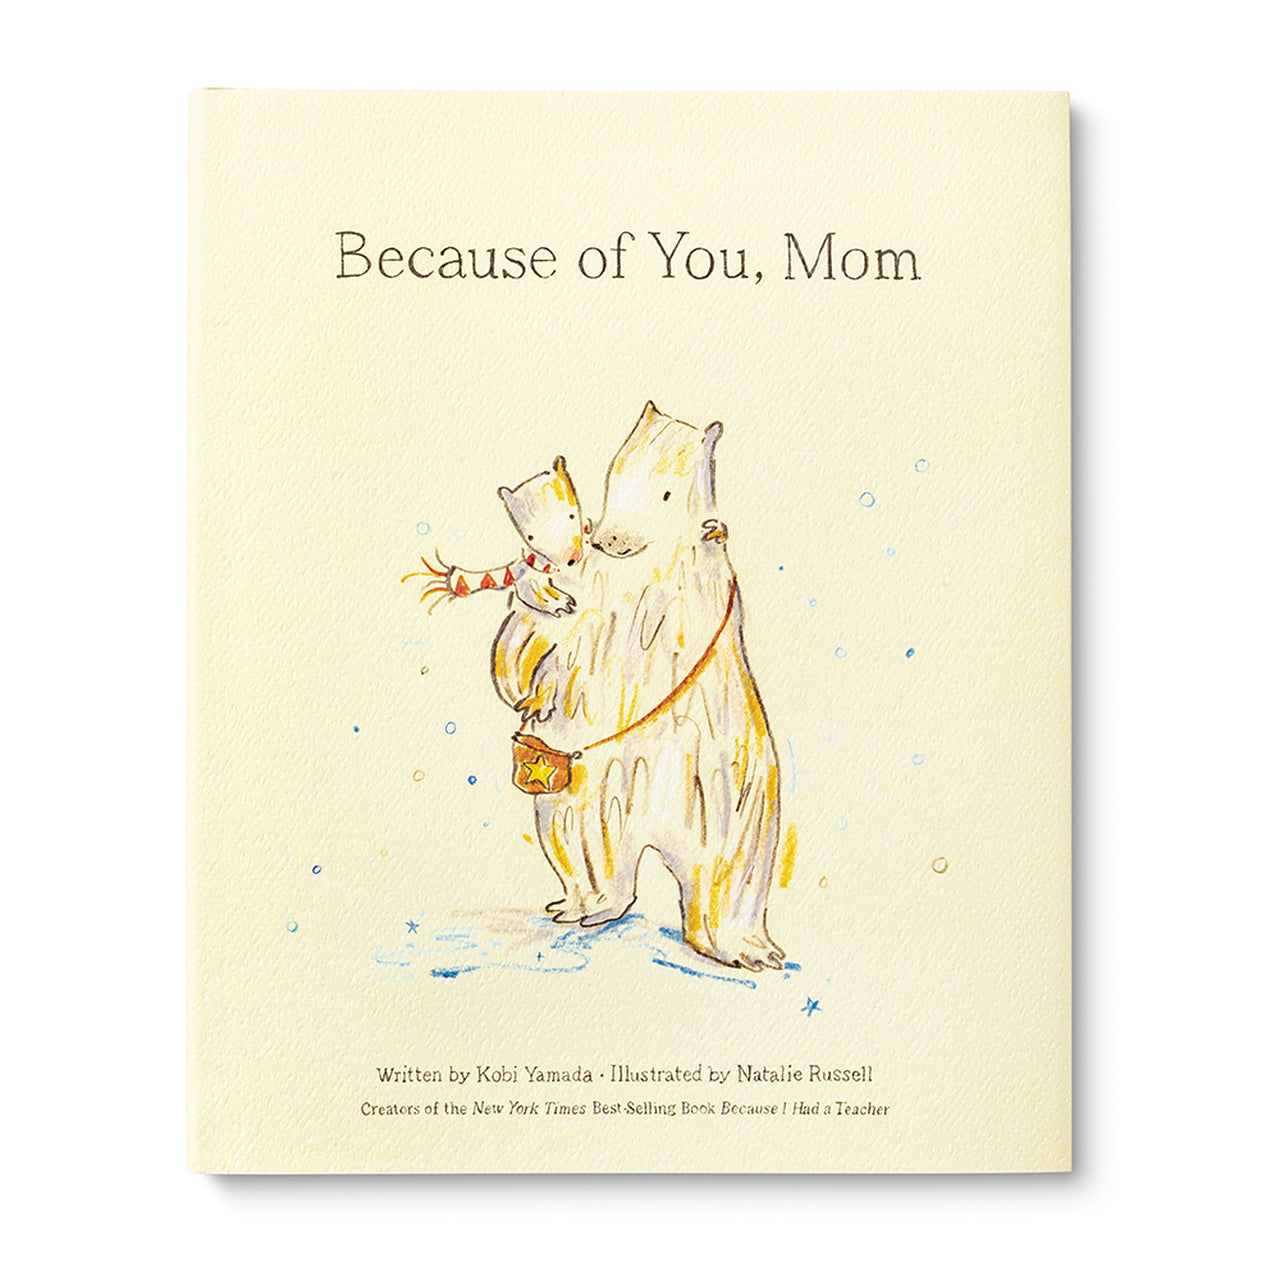 "Because of You, Mom" Book